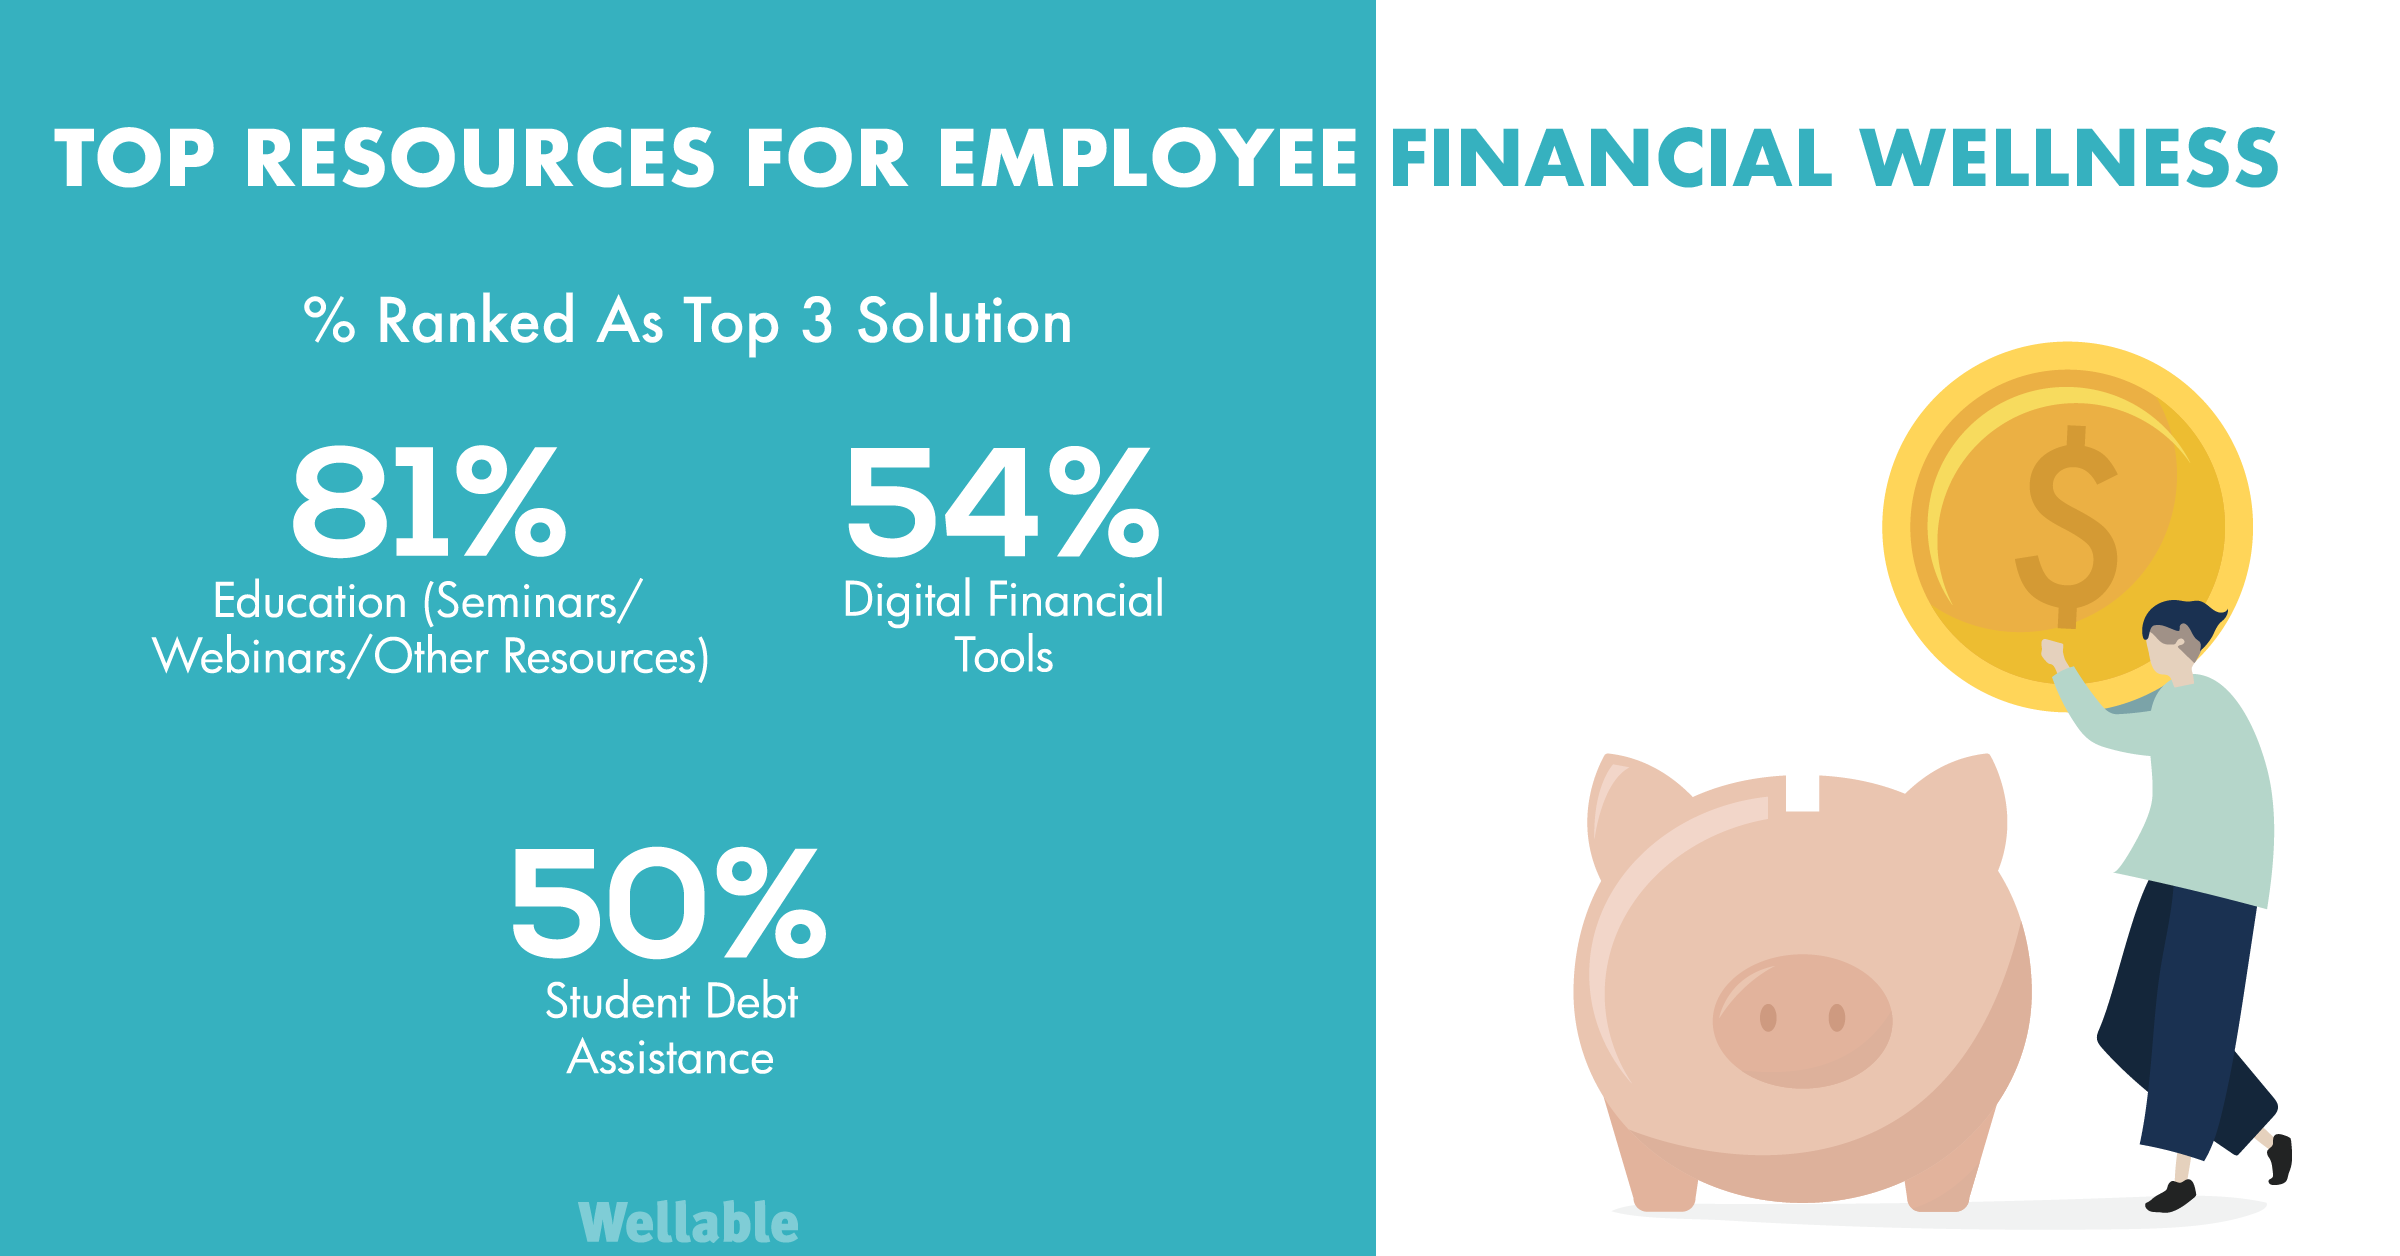 Top Resources For Employee Financial Wellness